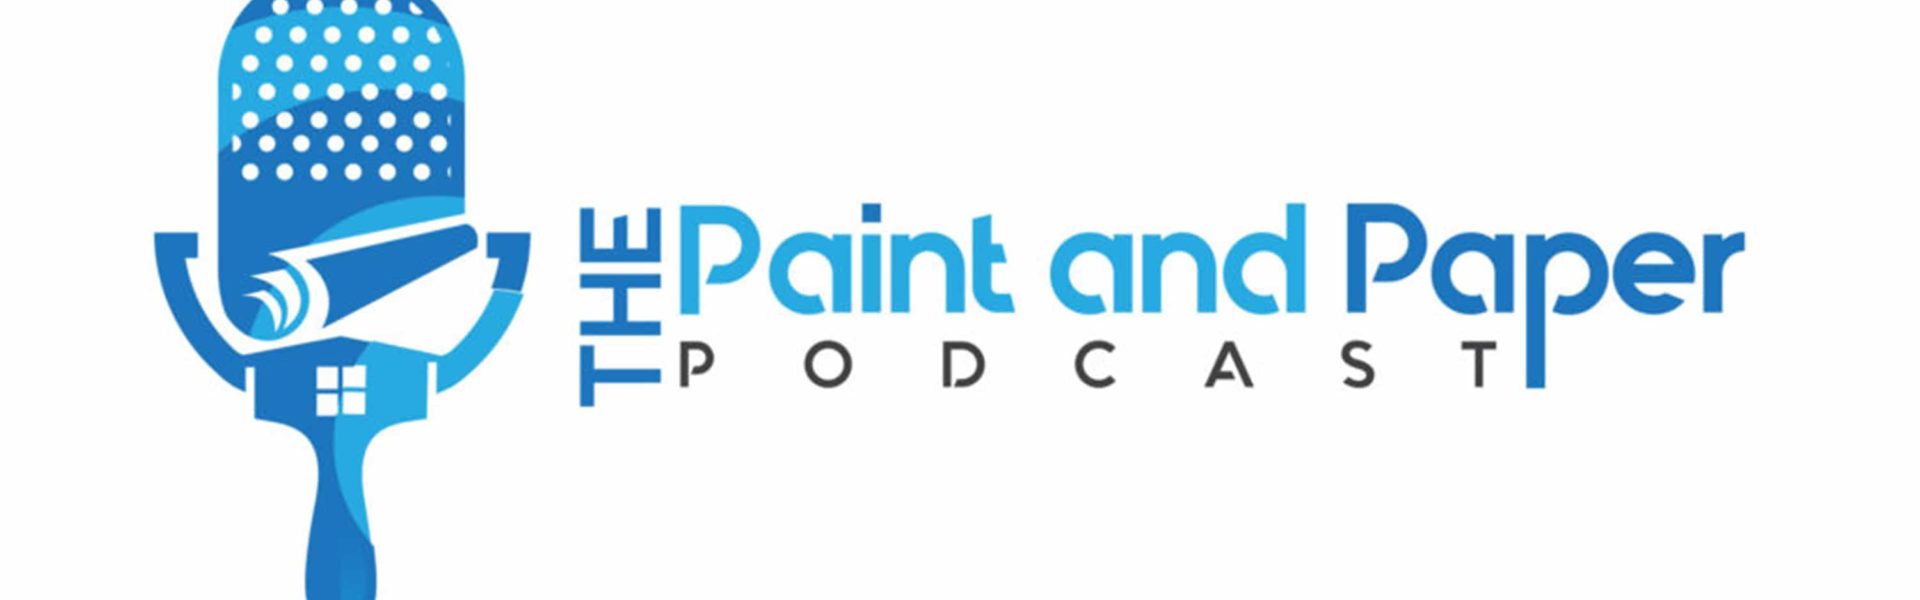 Paint & Paper Podcast with David Cook - Gary and Kathy Leland